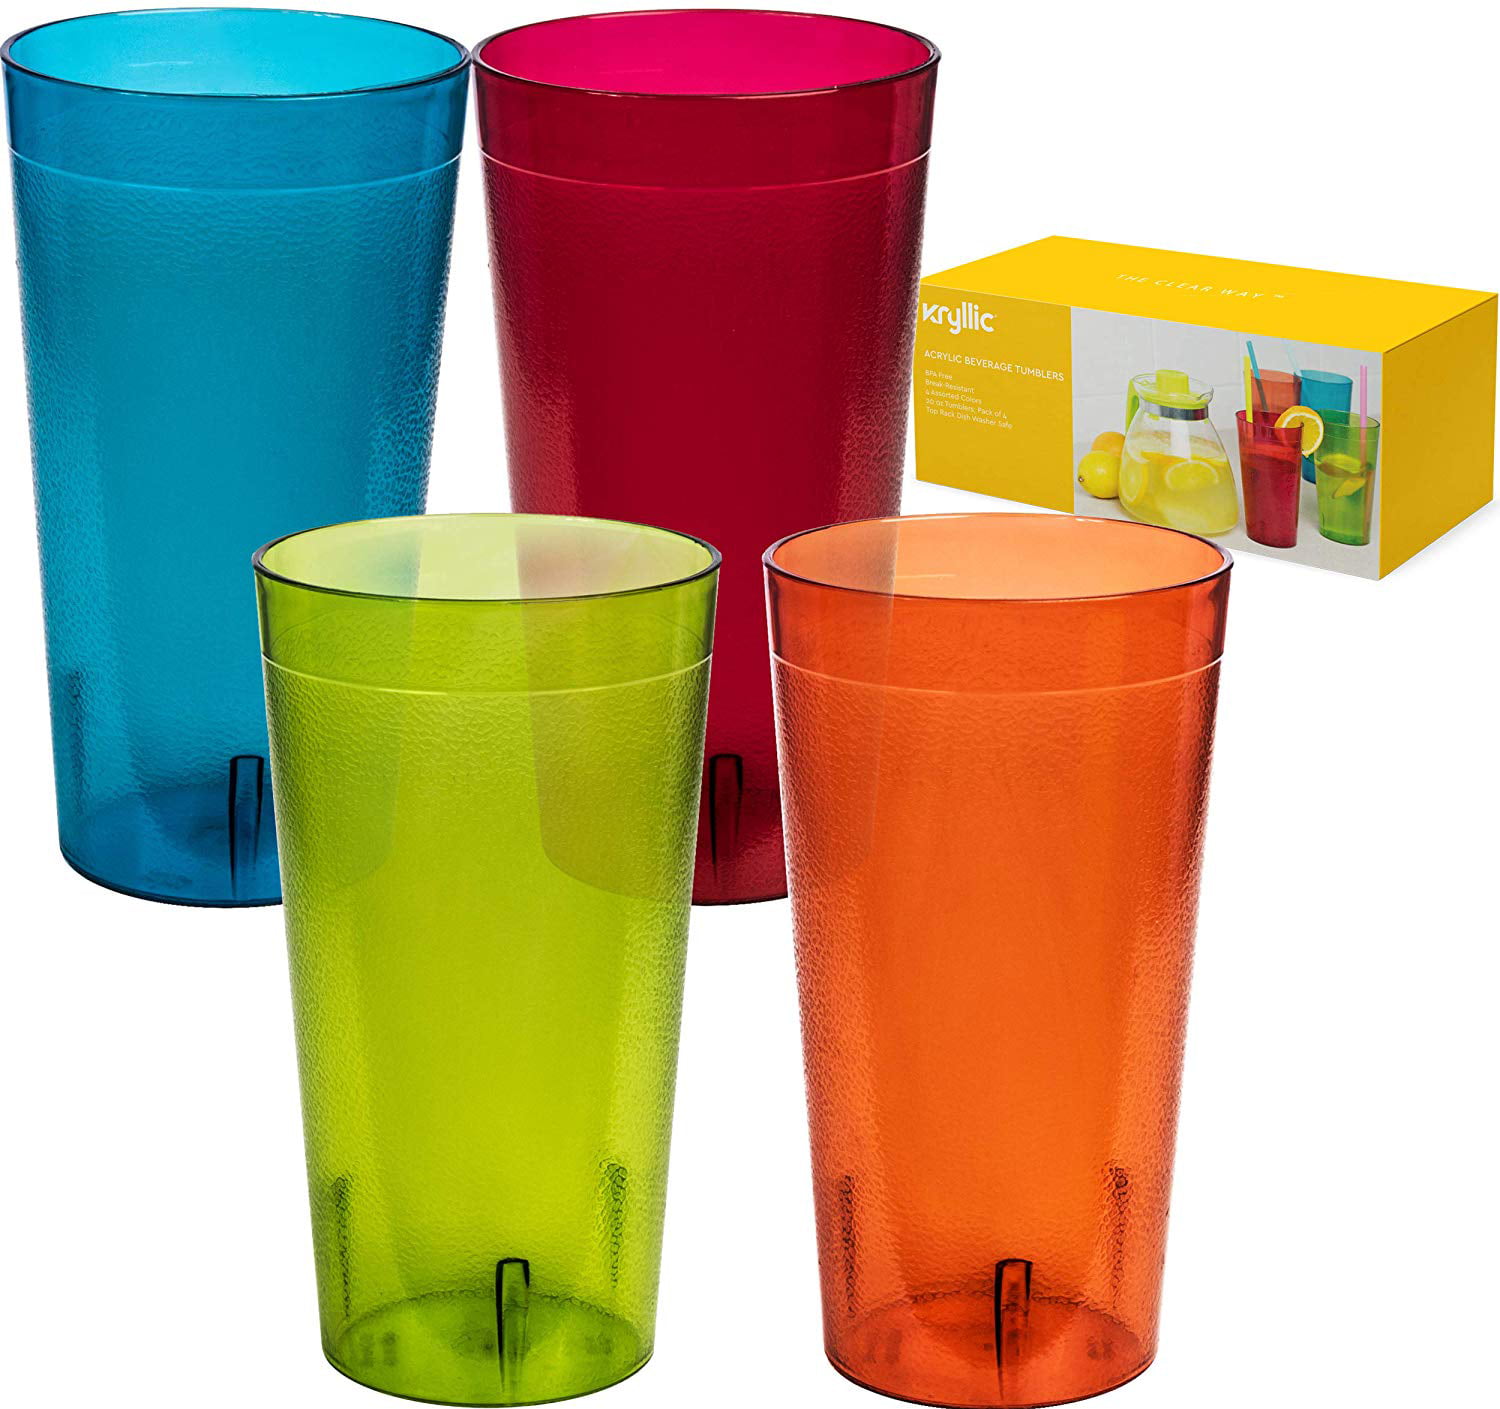 Details about   32-ounce Plastic Tumblers Reusable BPA Free Dishwasher Safe Restaurant-Quality 